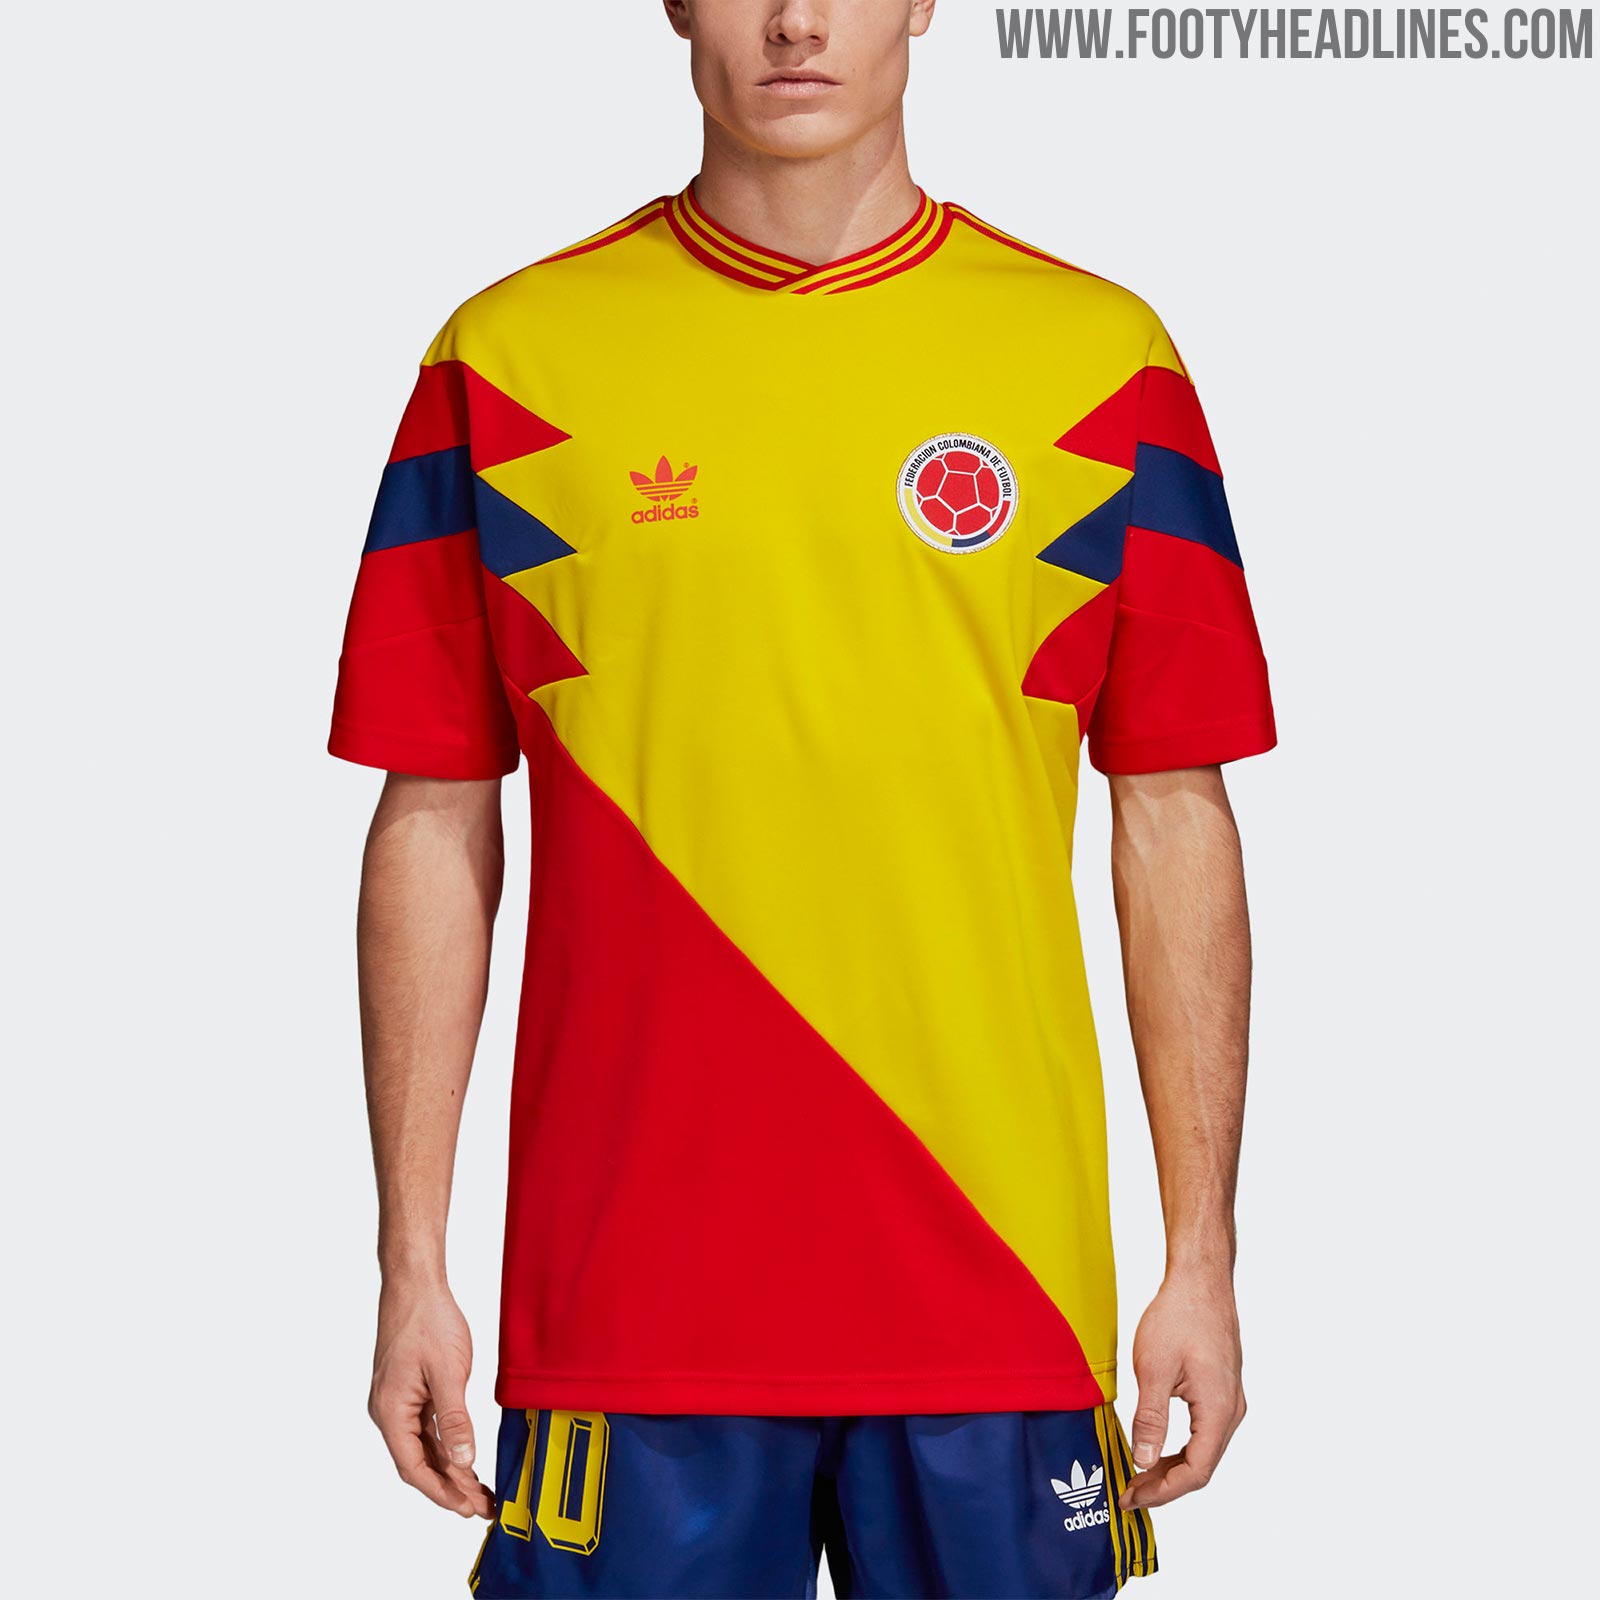 Argentina, Colombia, Germany & Russia 2018 World Cup Mash-Up Jerseys Released - Headlines